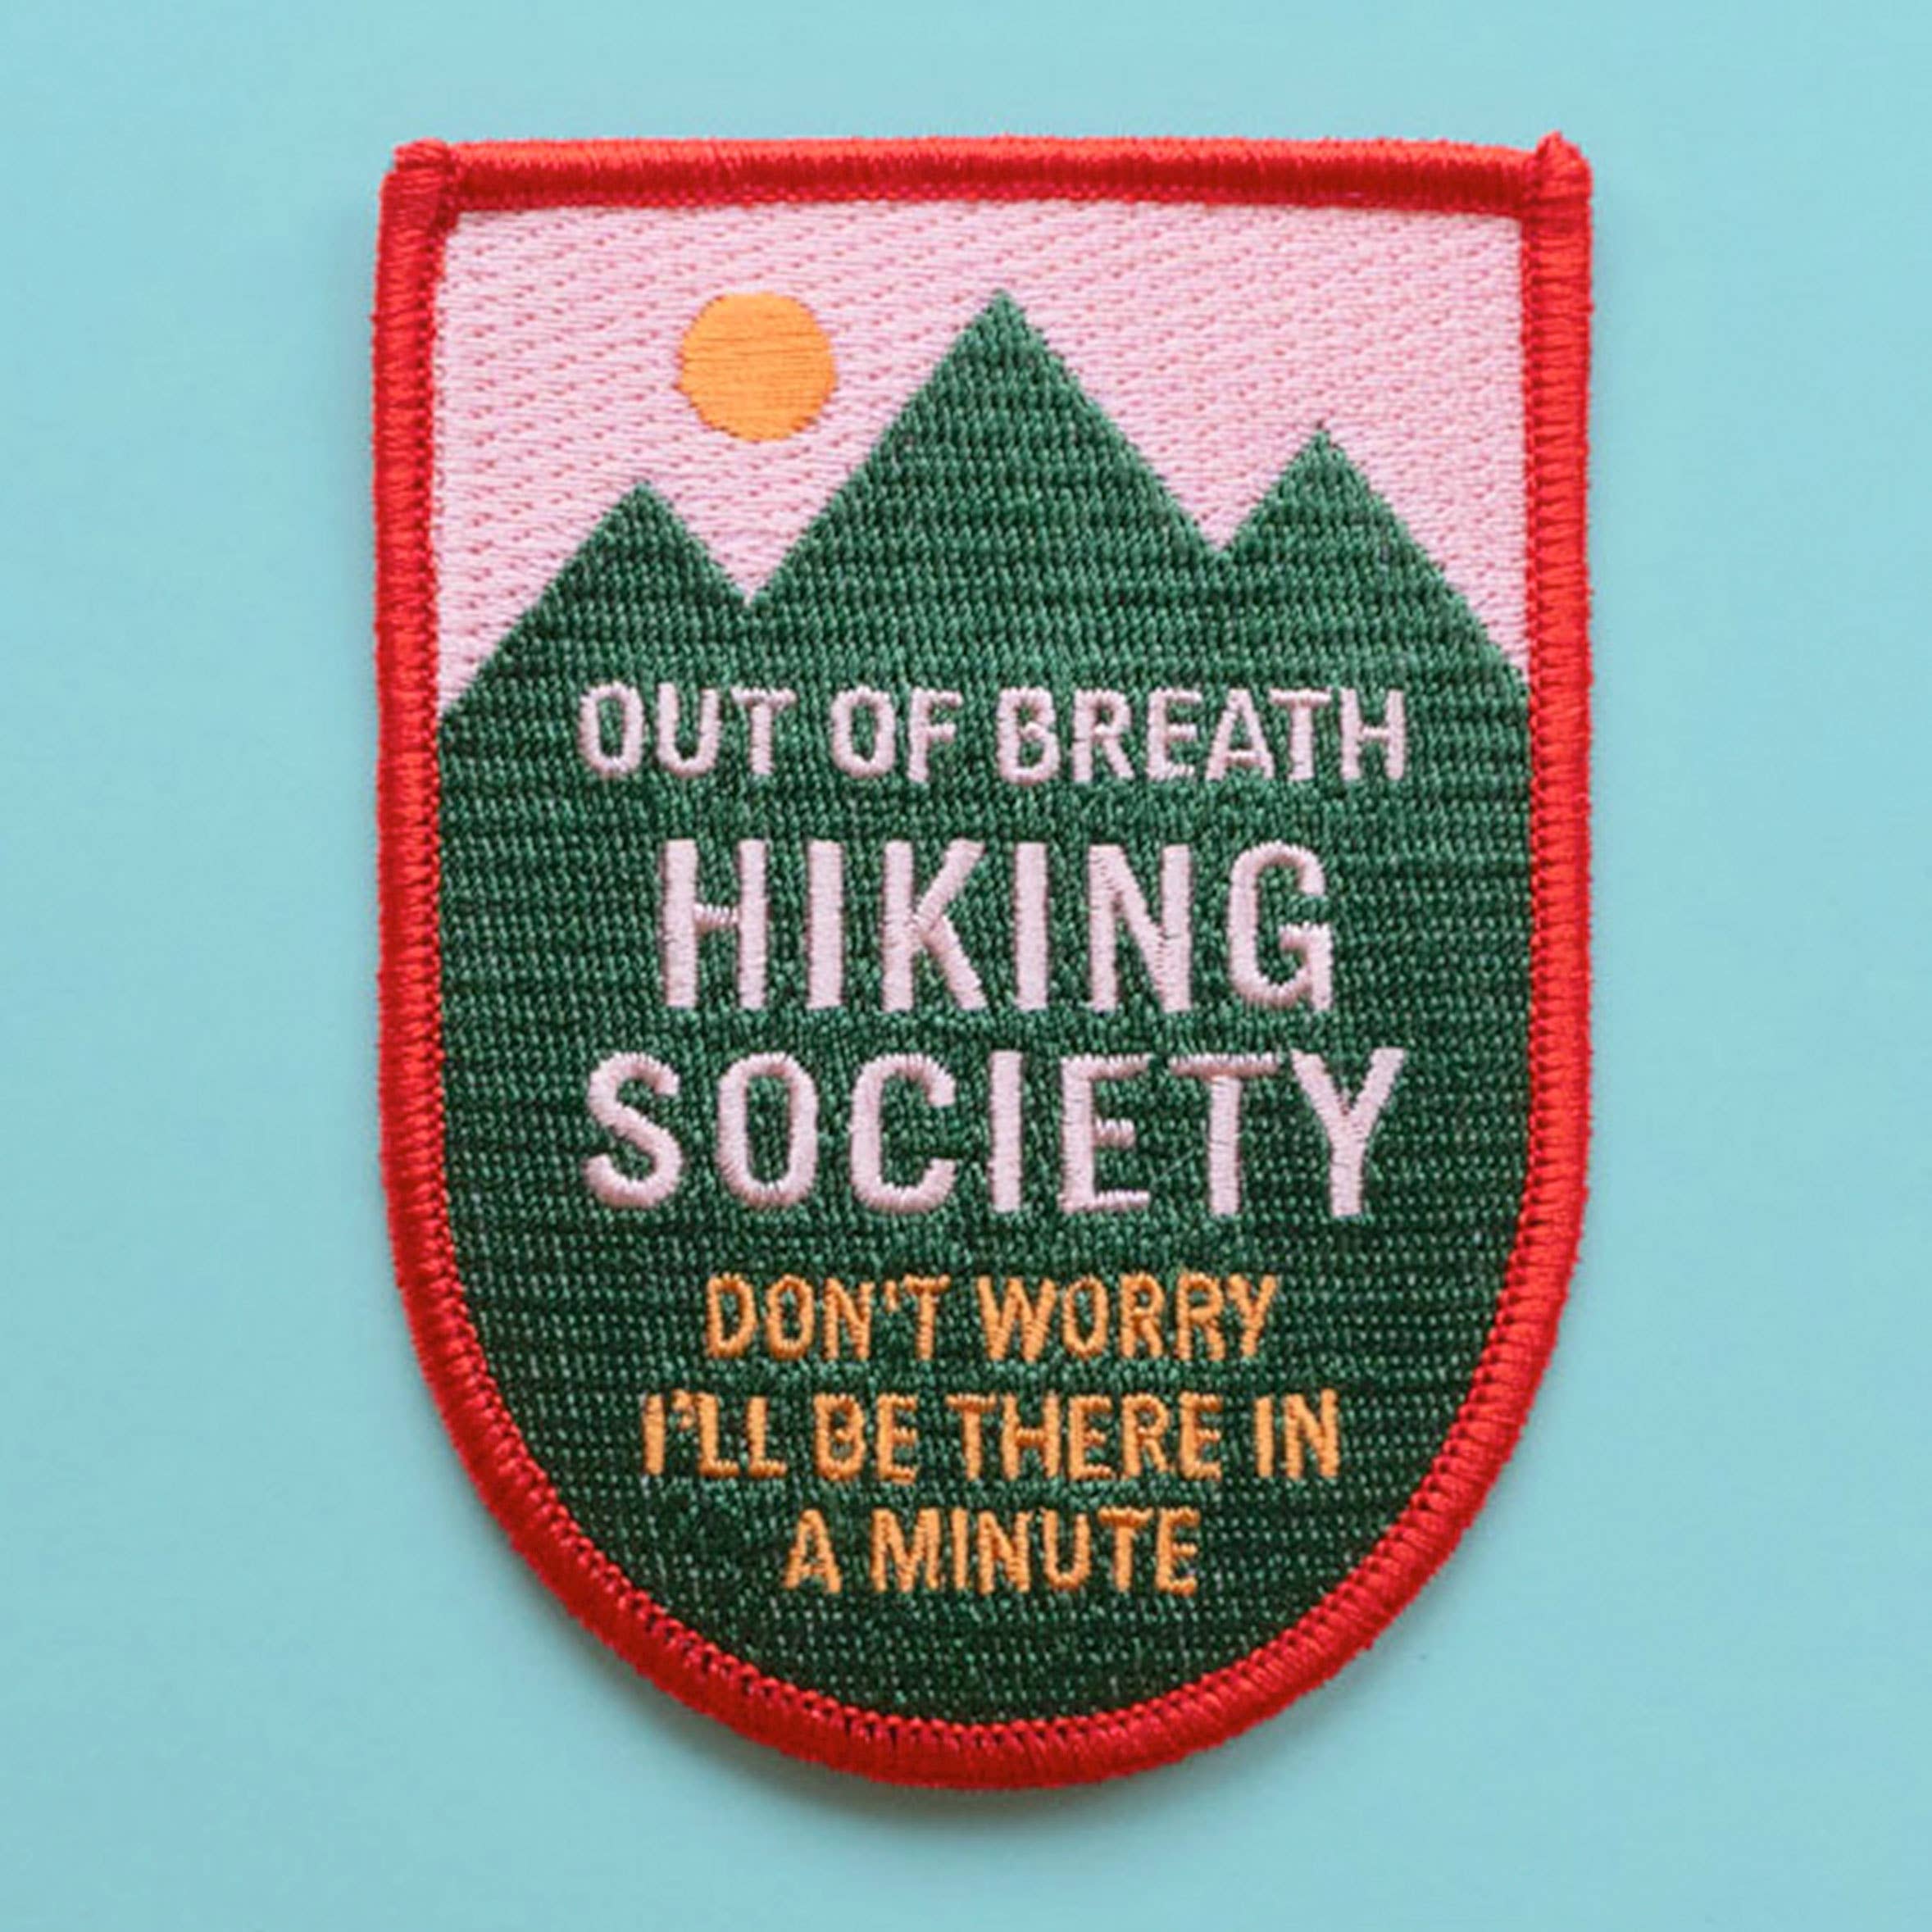 out of breath hiking society patch embroidered